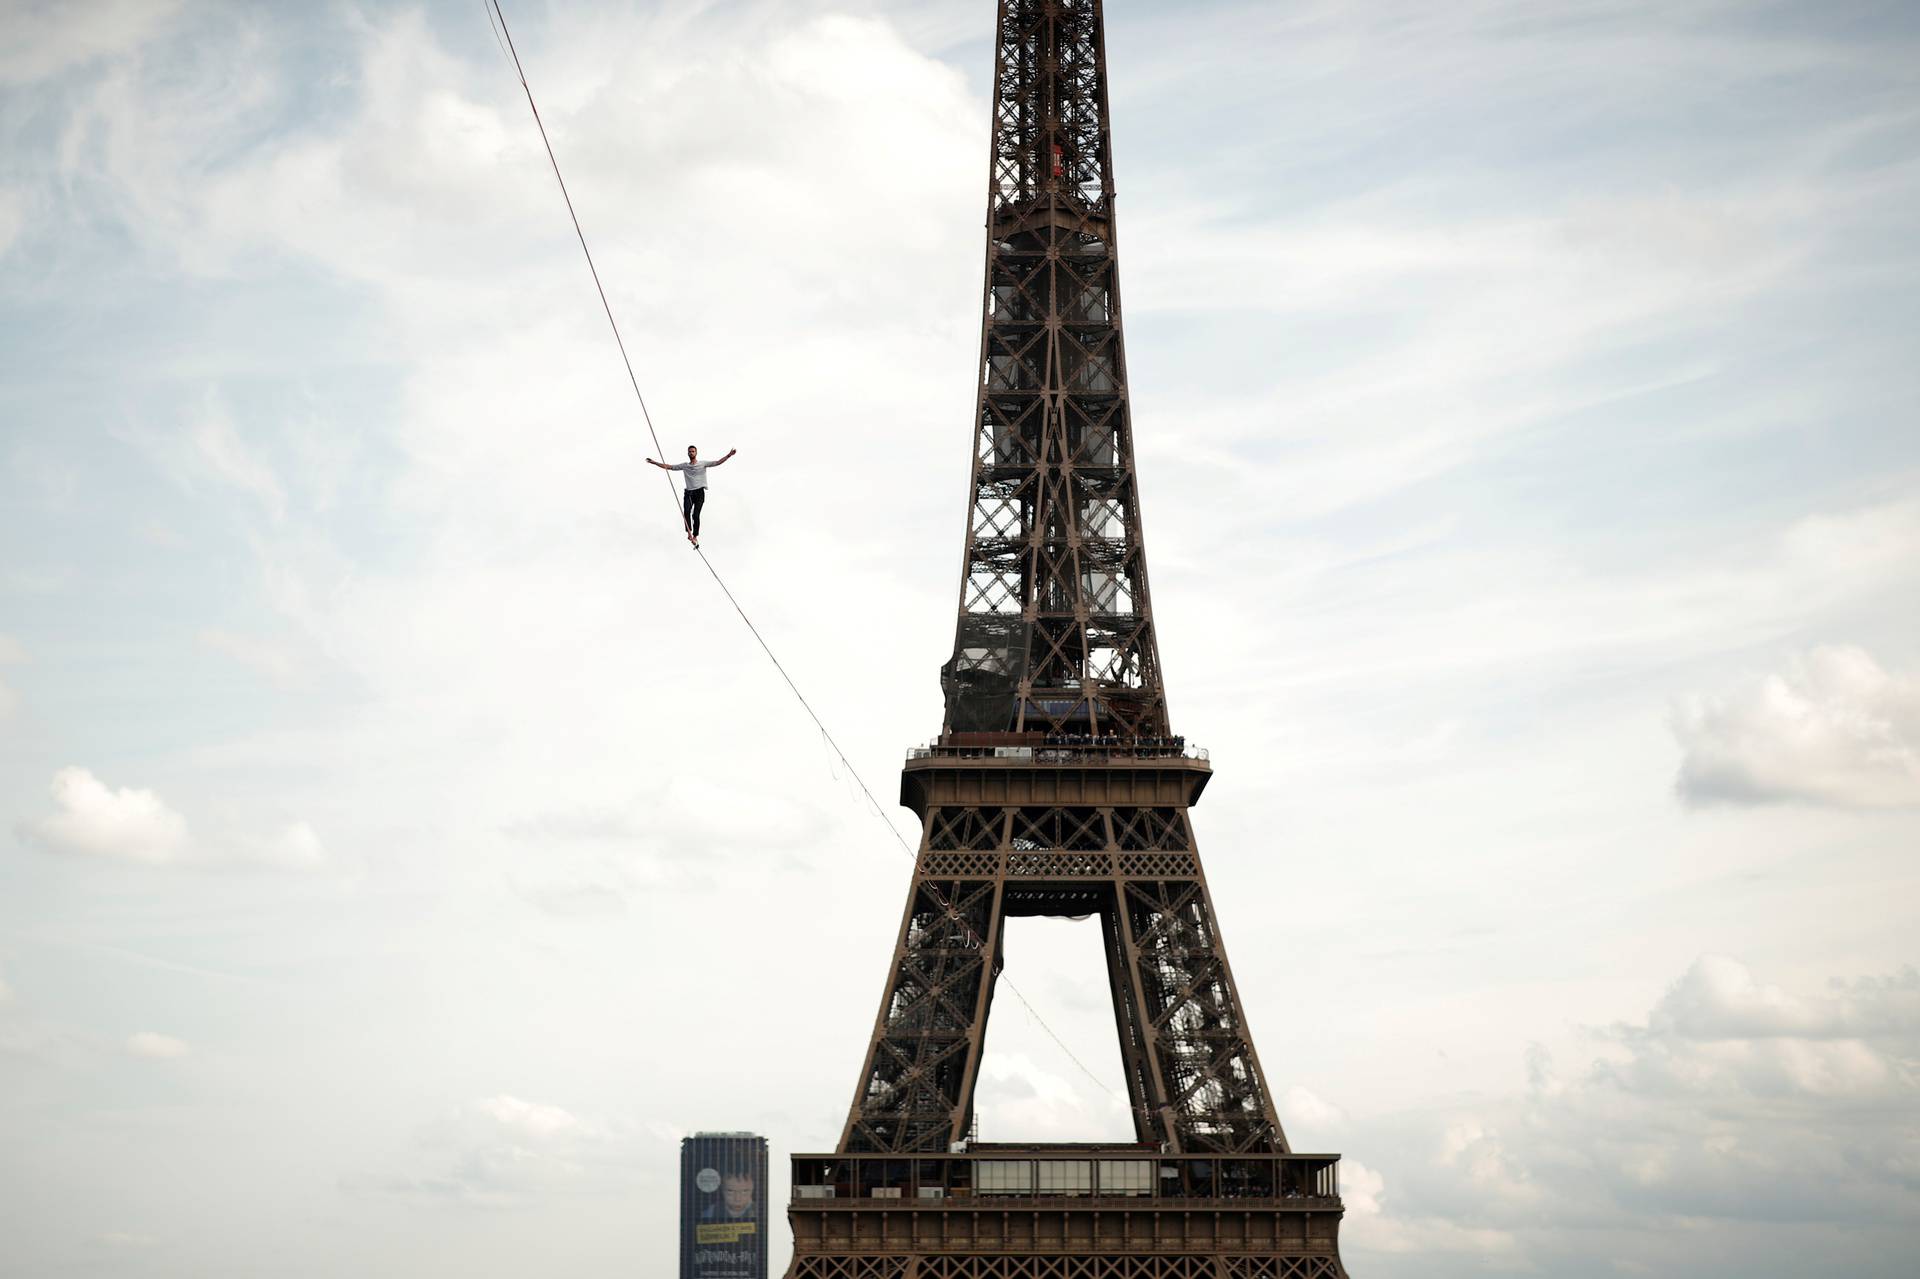 French acrobat Nathan Paulin walks on a slackline between the Eiffel Tower and the Theatre National de Chaillot as part of events around France for National Heritage Day